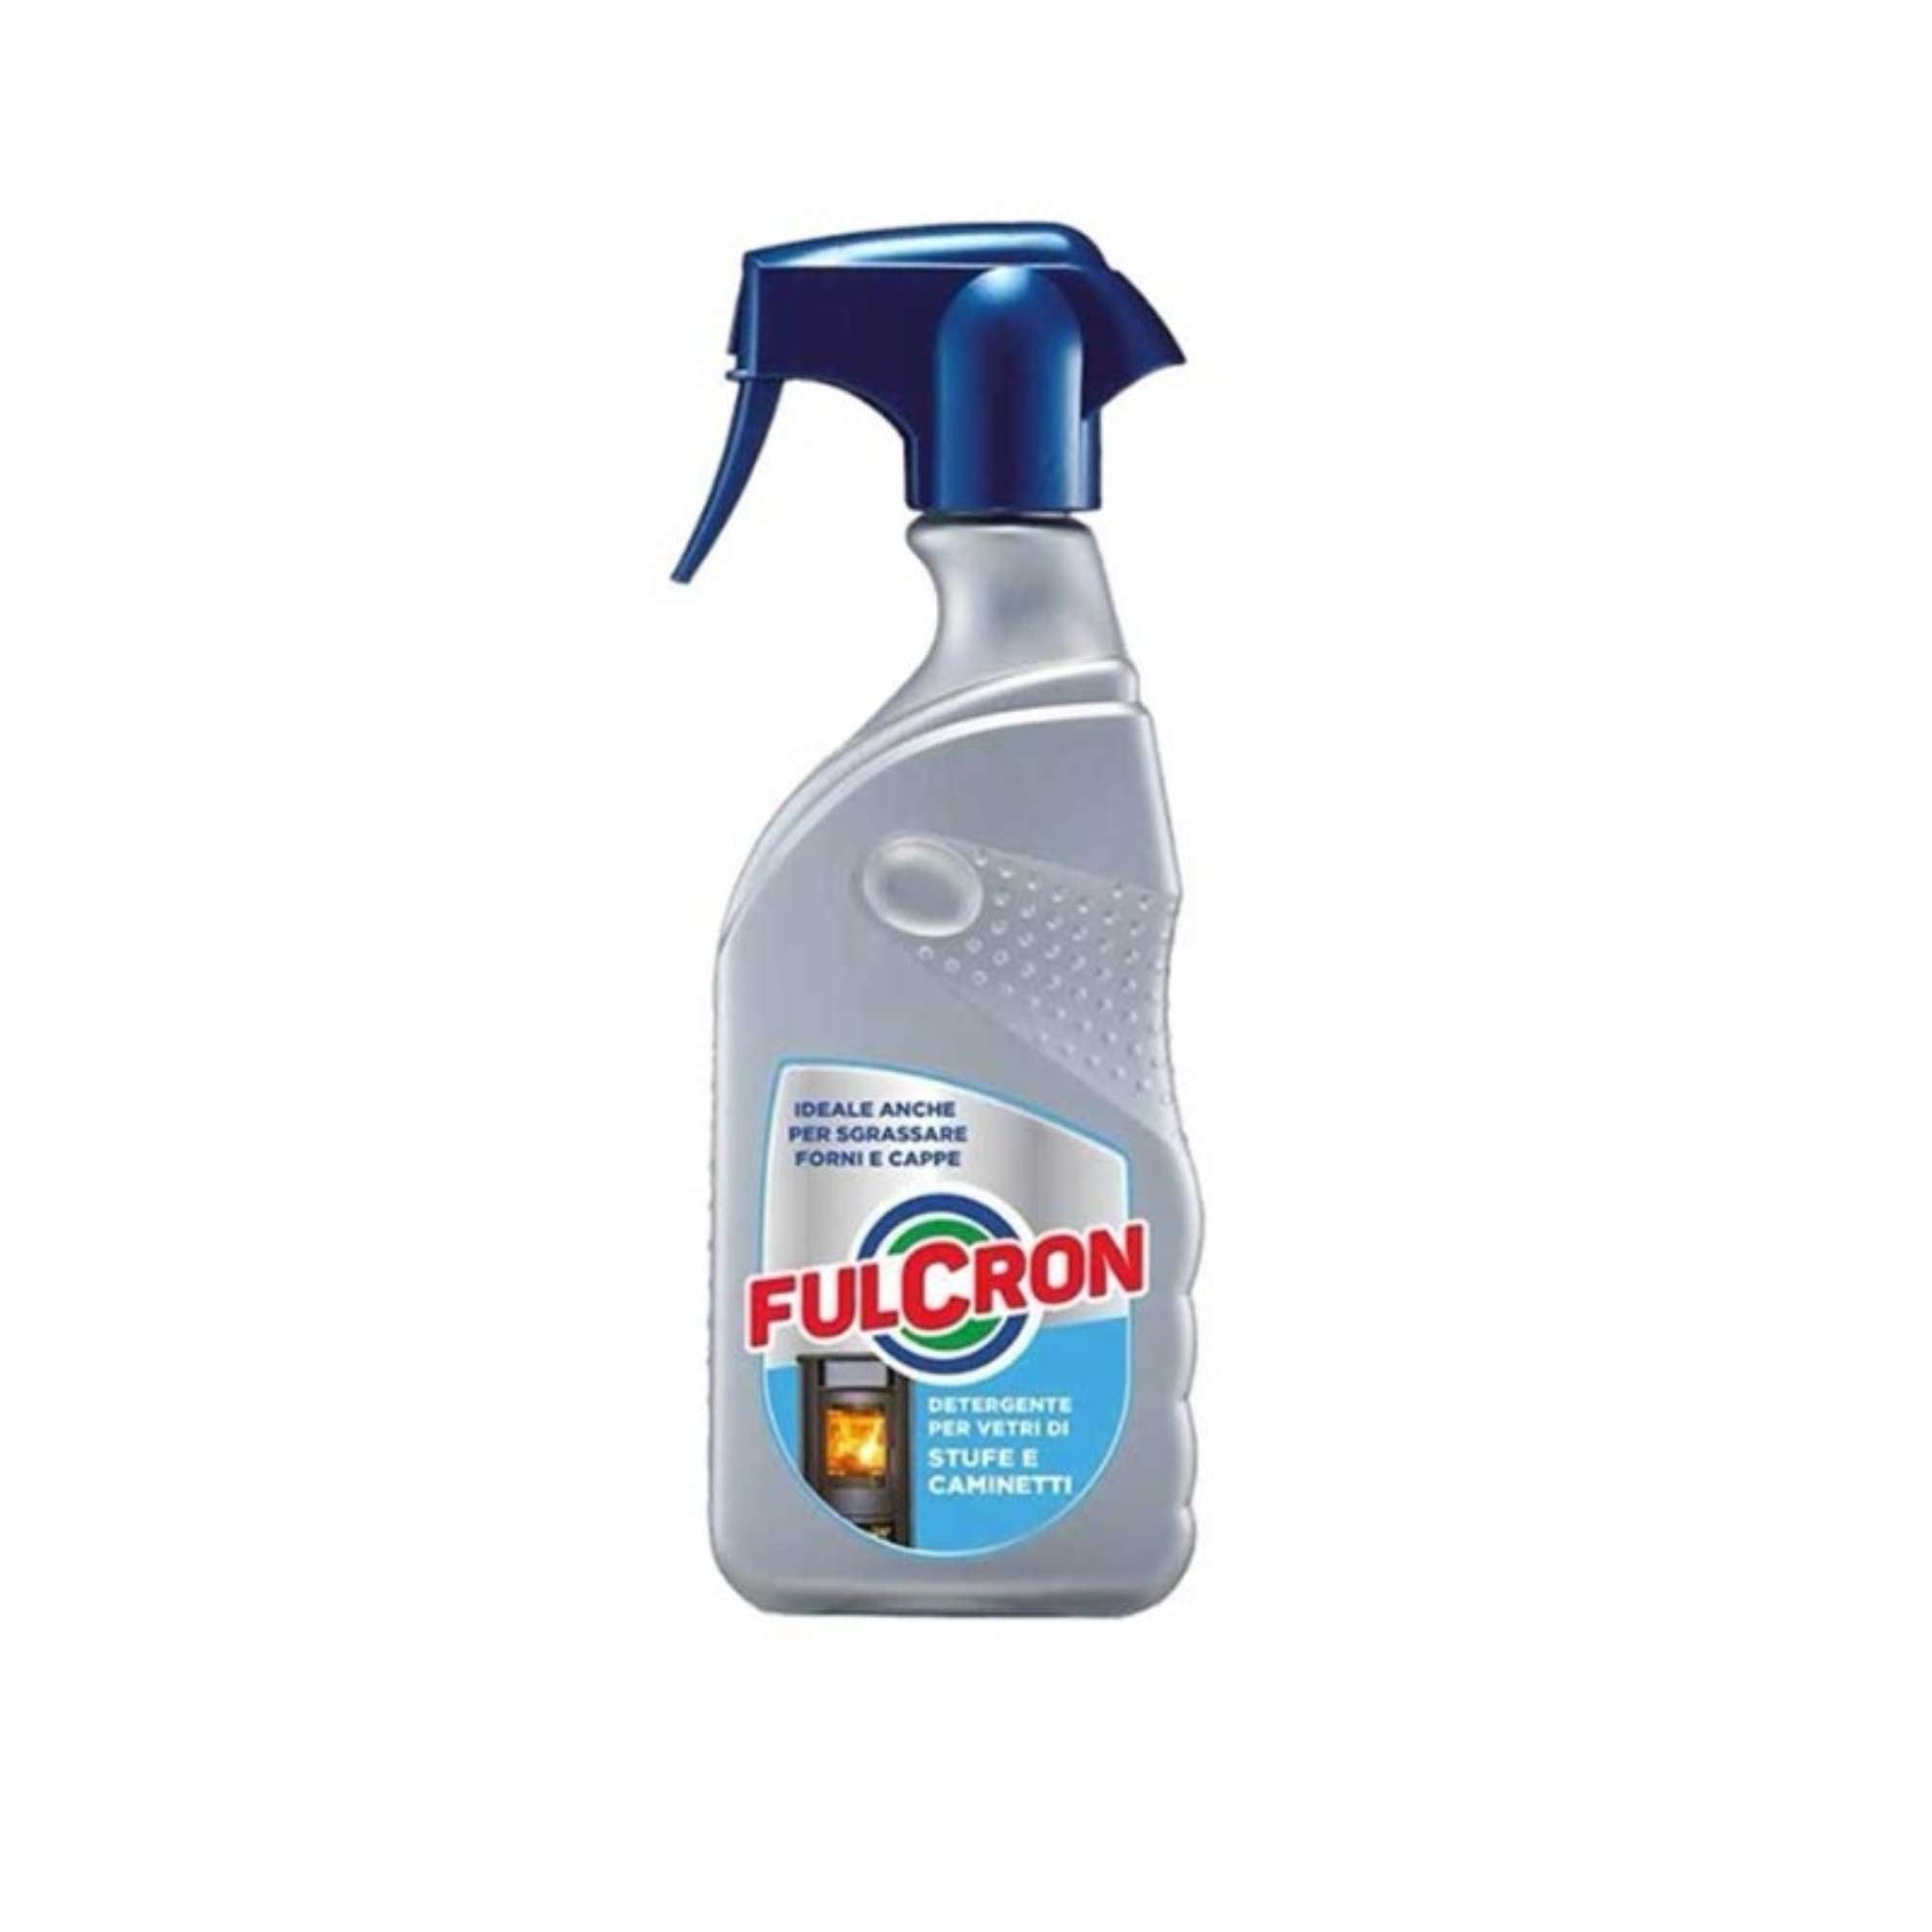 Fulcron Glass and Fireplace Spray 500 ml - Arexons 2552